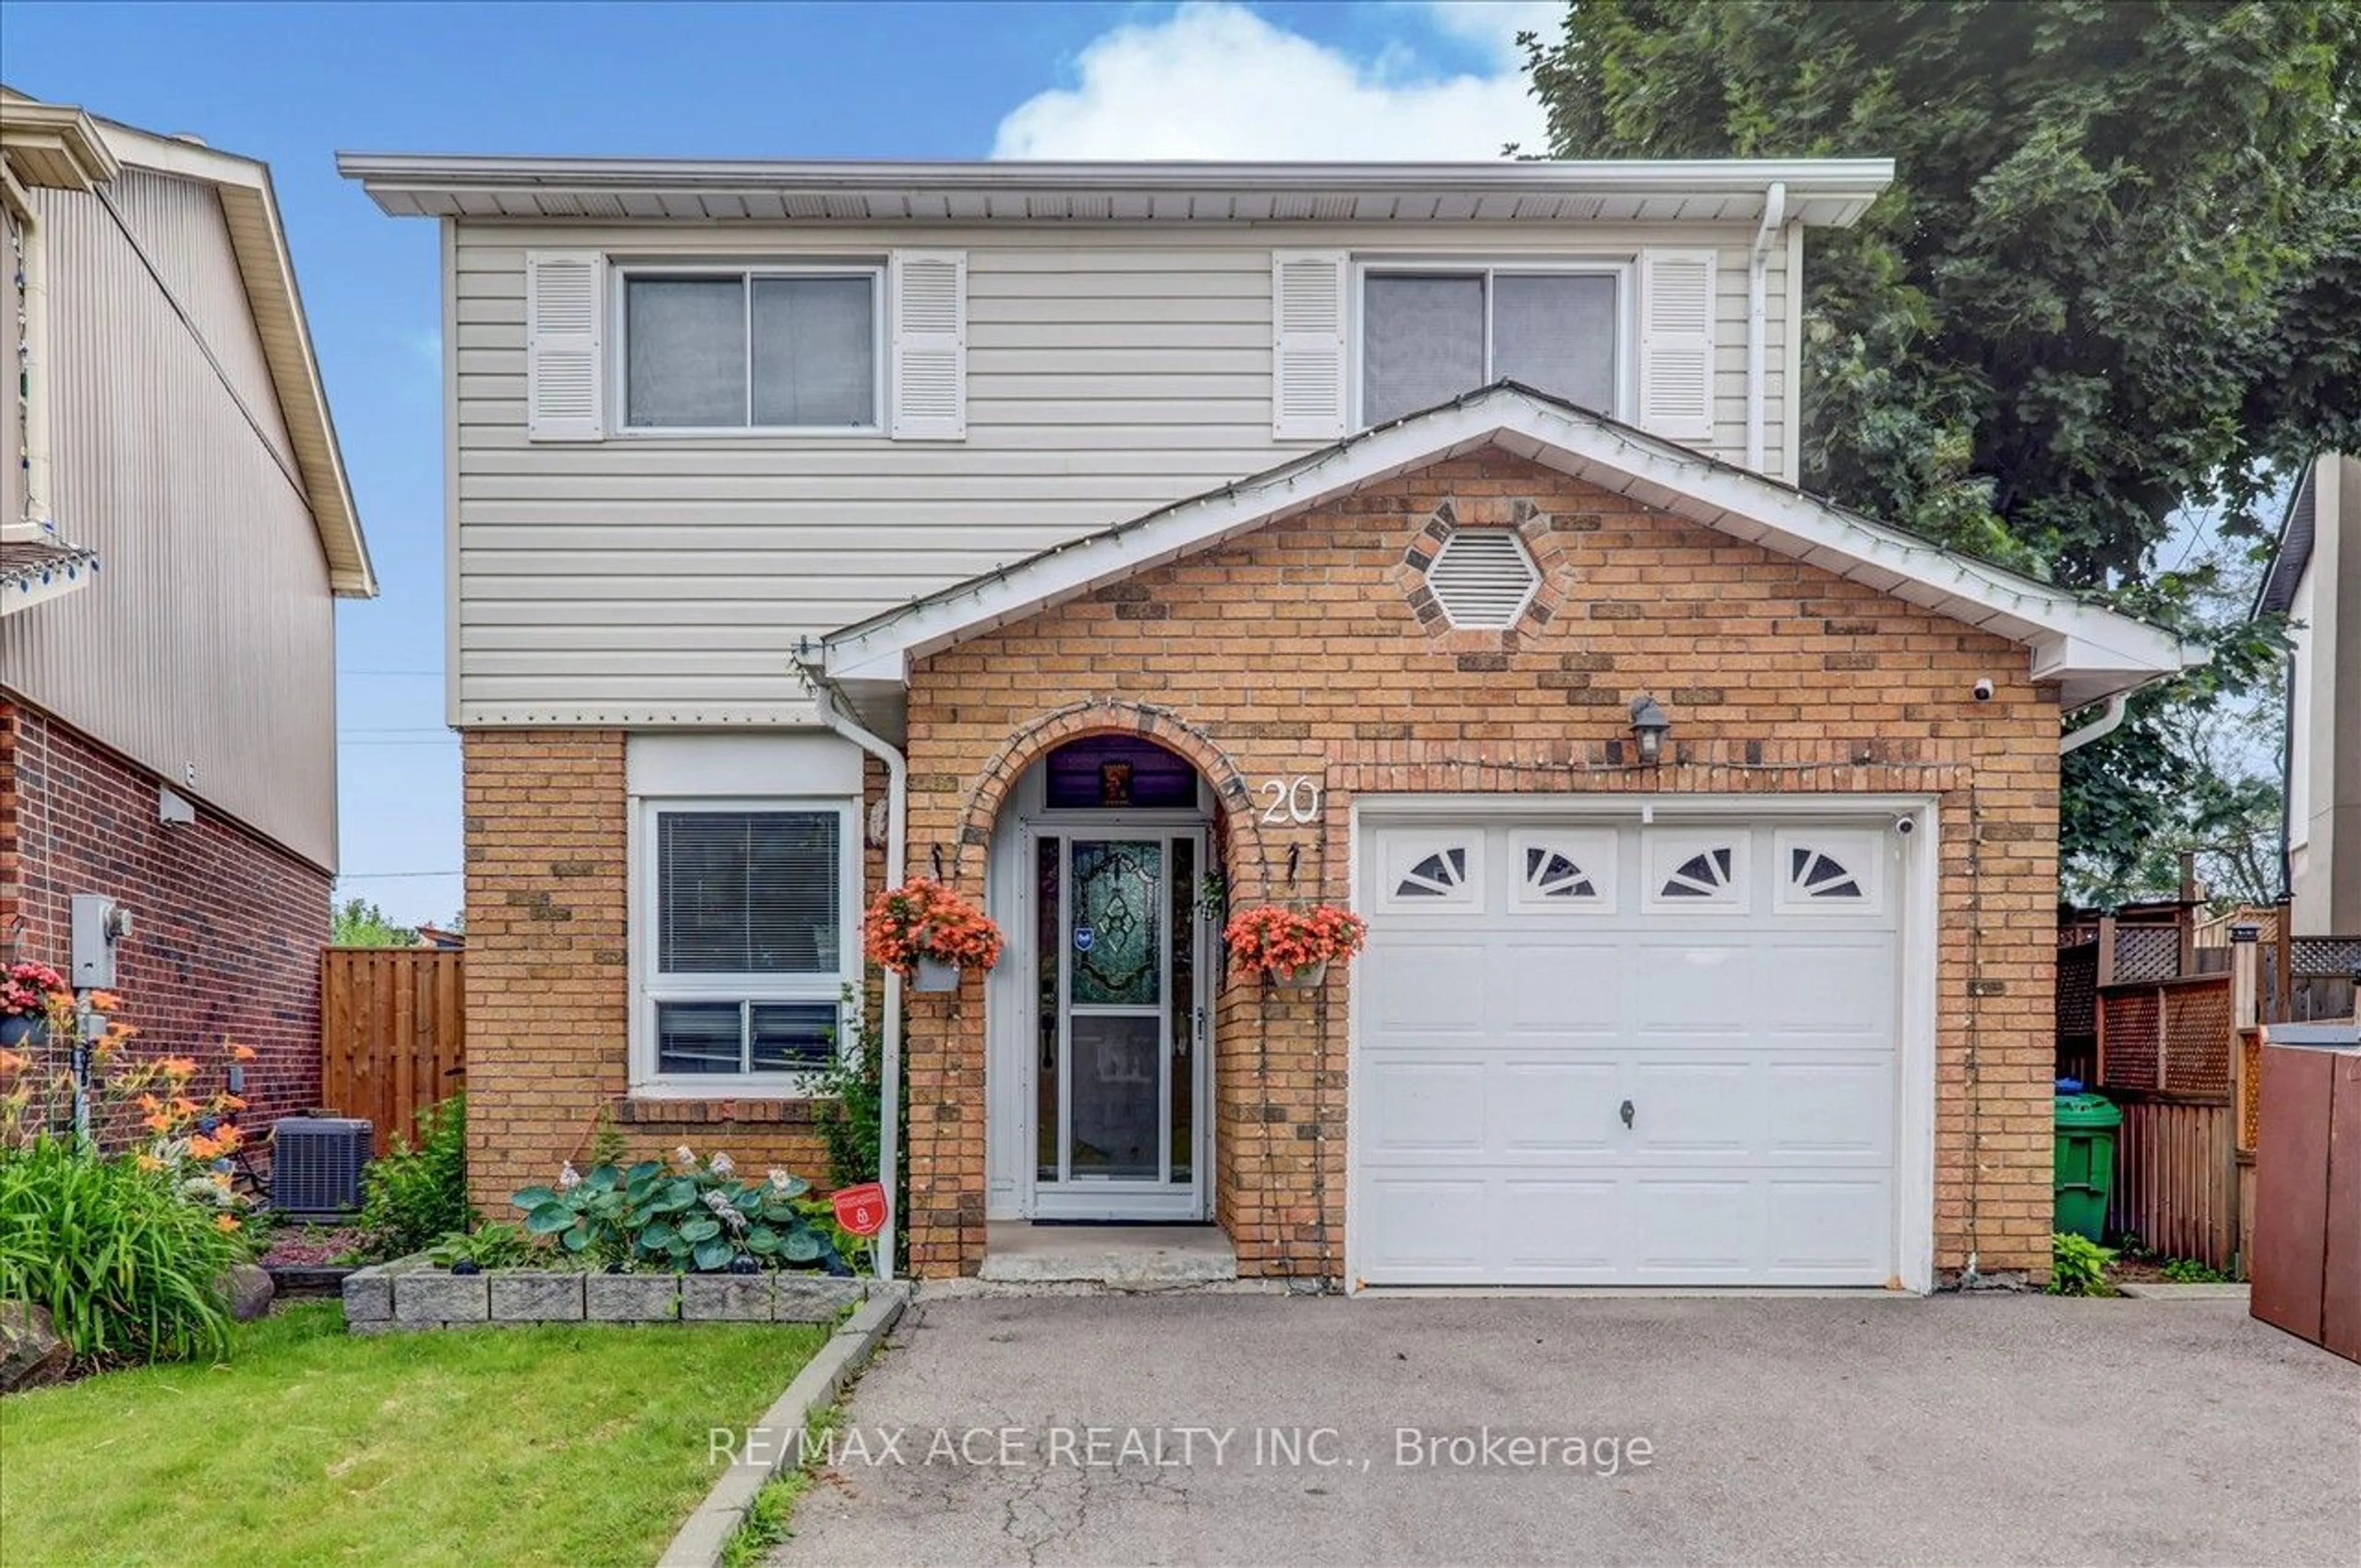 Home with brick exterior material for 20 Histon Cres, Brampton Ontario L6V 3R1